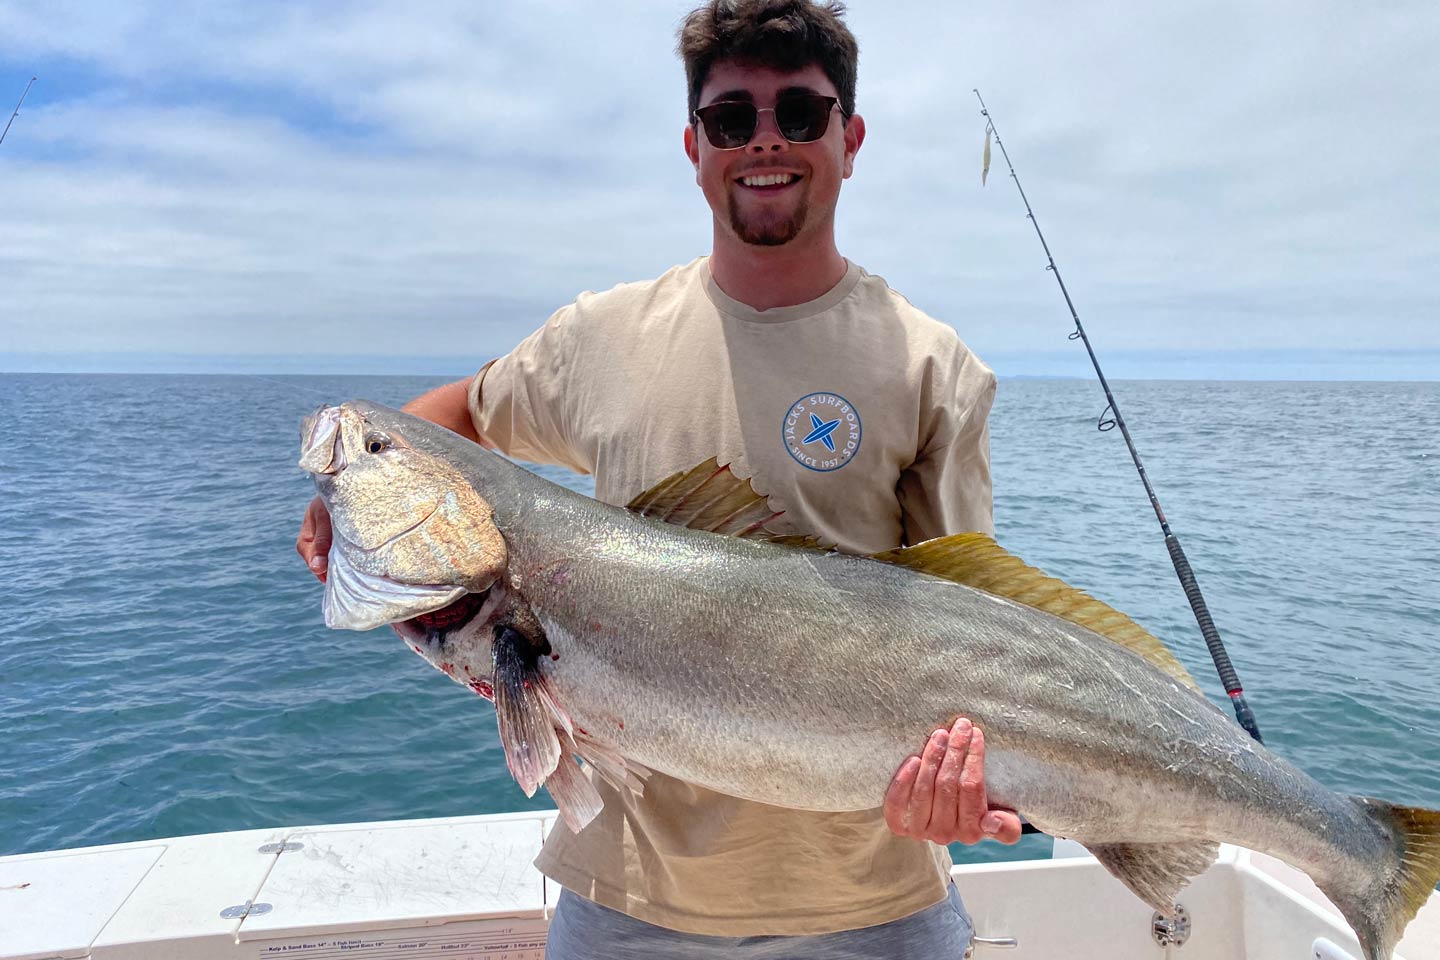 A young male angler happily showing off a White Seabass, caught in the waters off the coast of Catalina.